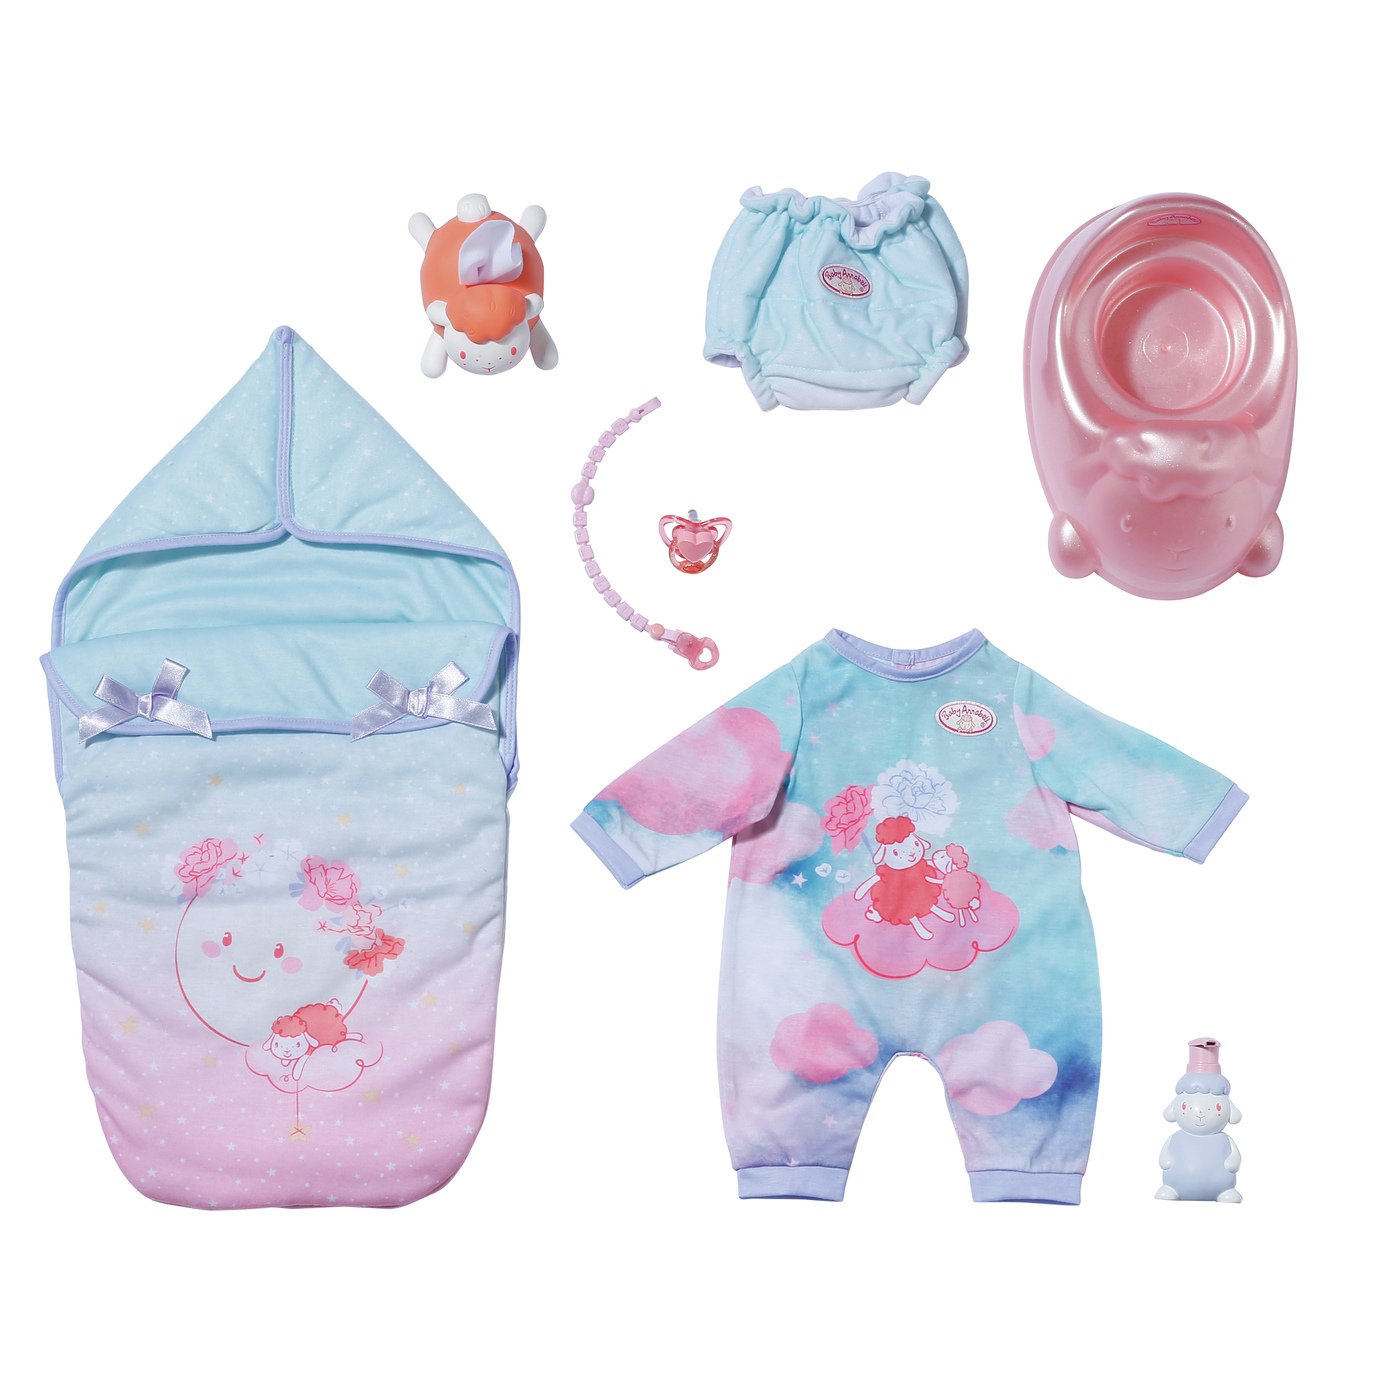 Baby Annabell Sweet Dreams Value Set Review